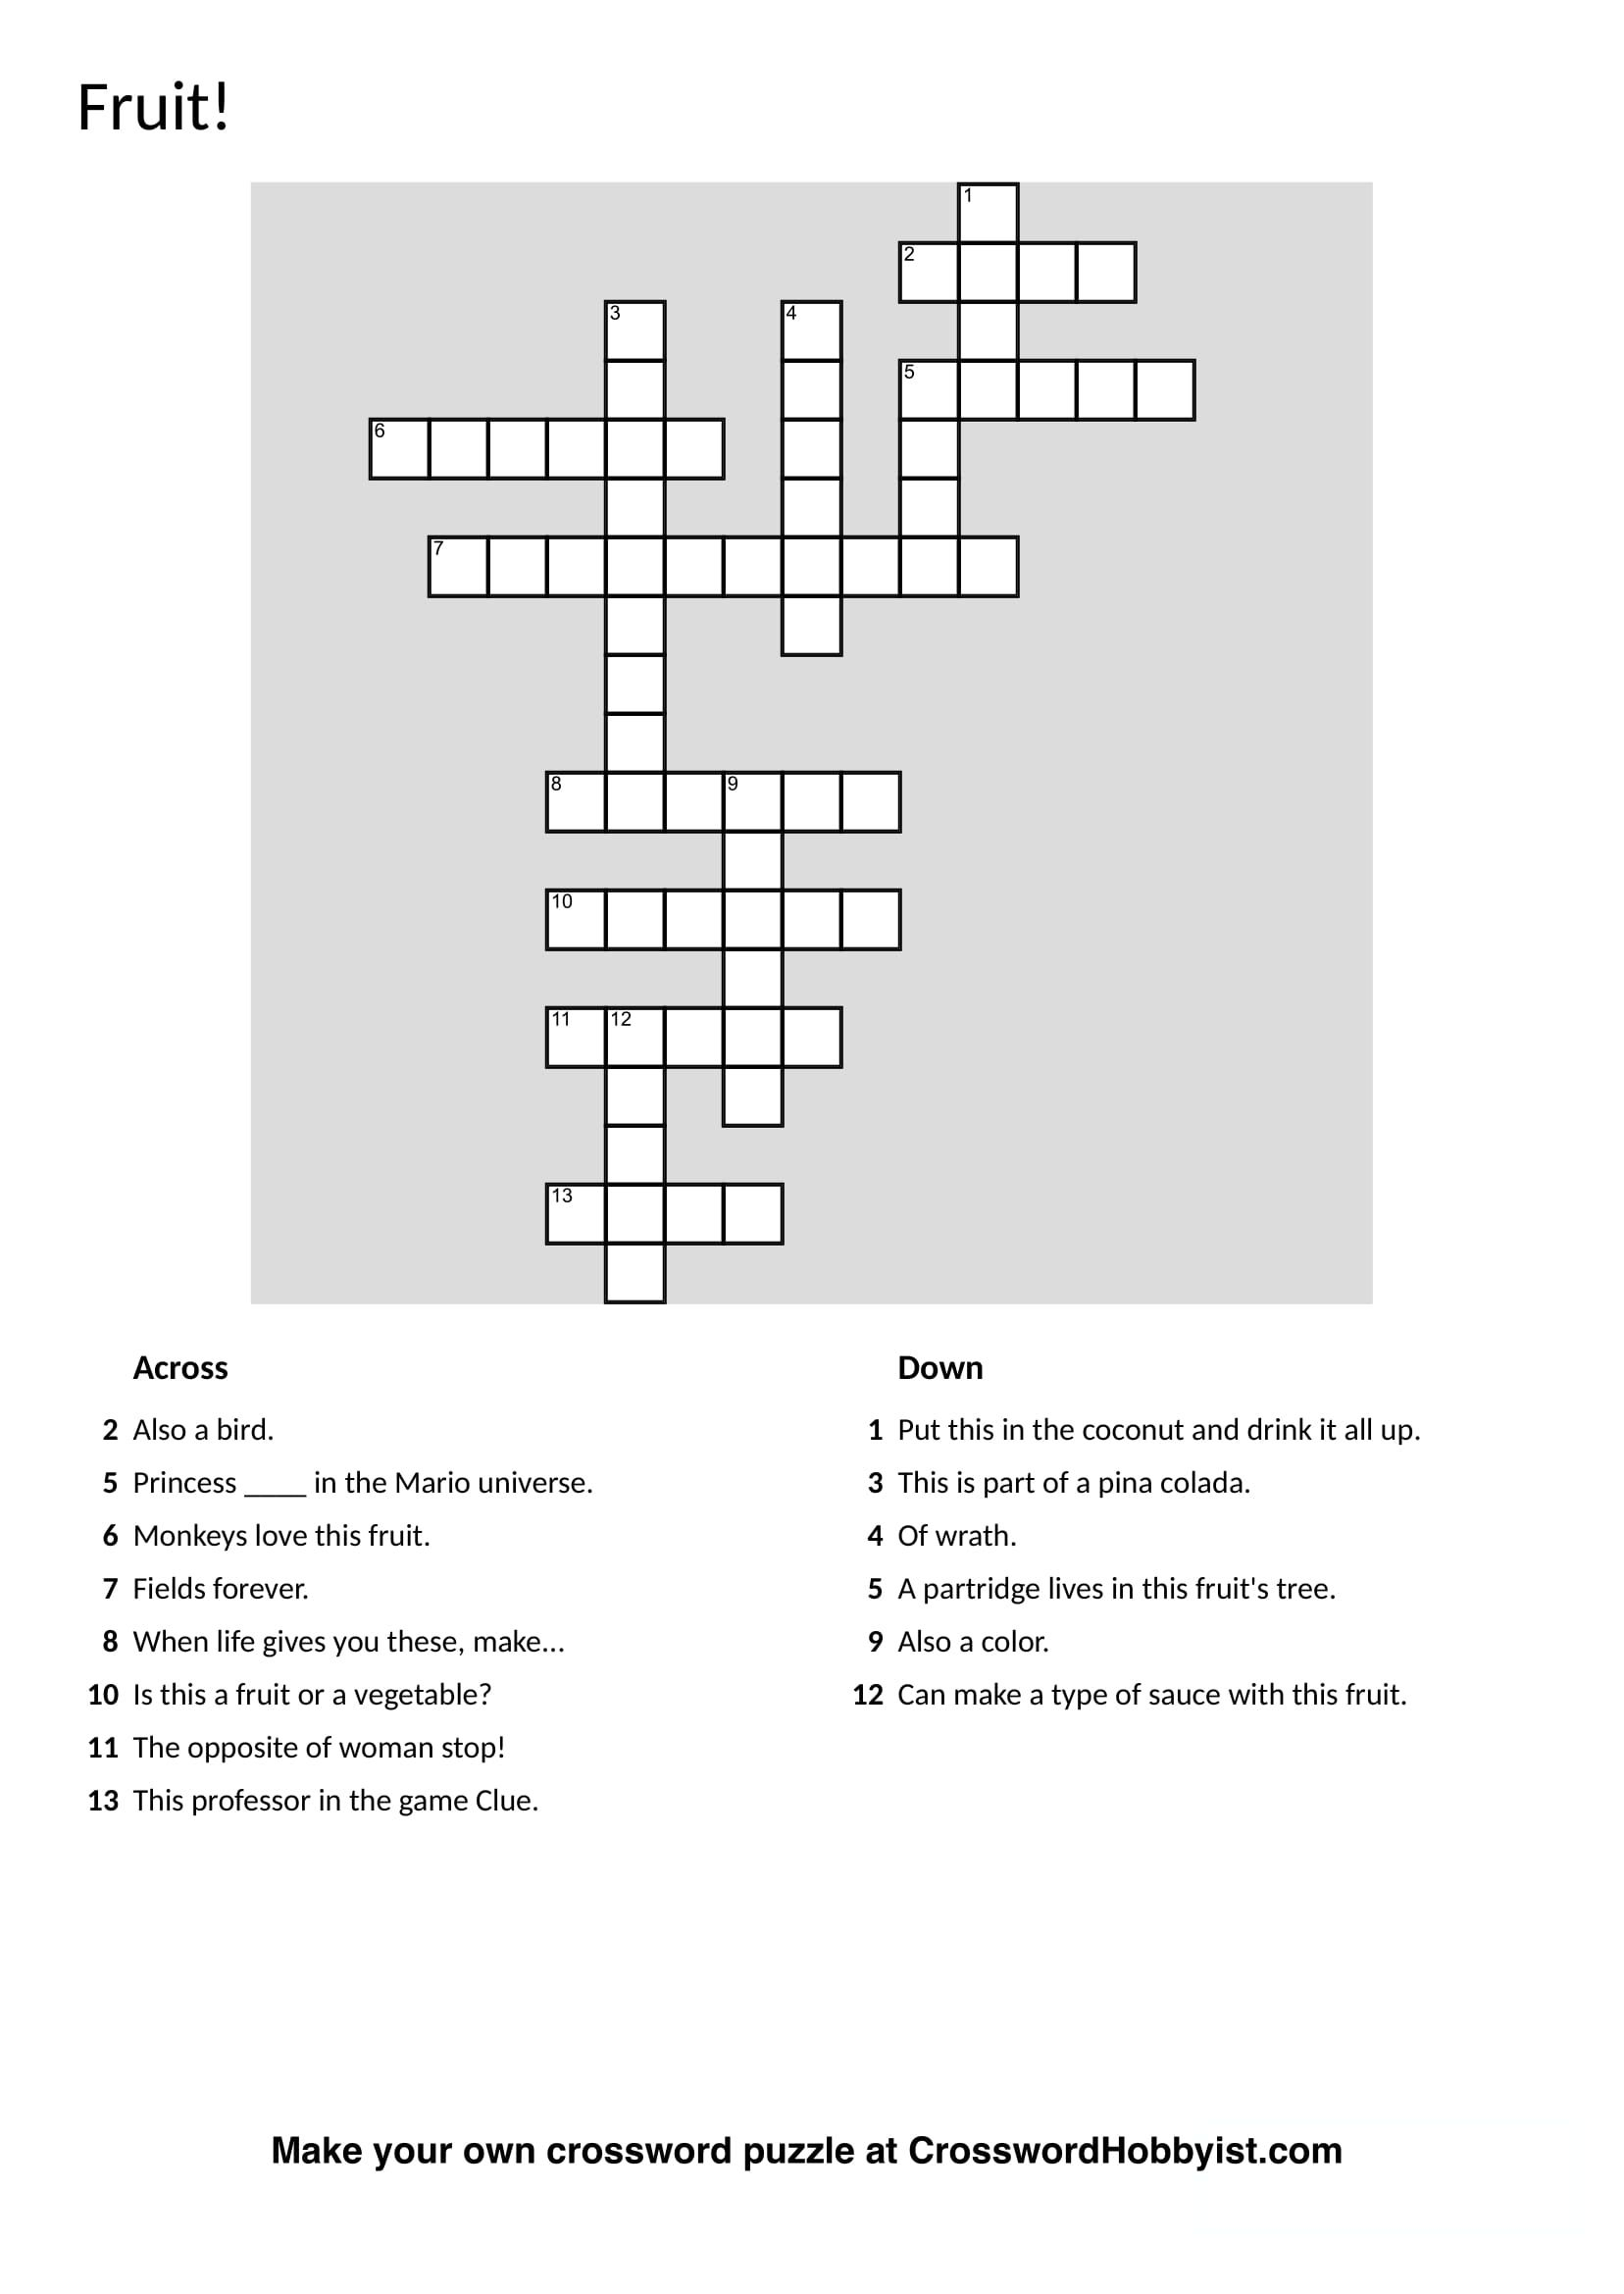 Free Online Crossword Puzzle Maker For Teachers Crosswords - Make Your Own Crossword Puzzle Free Printable